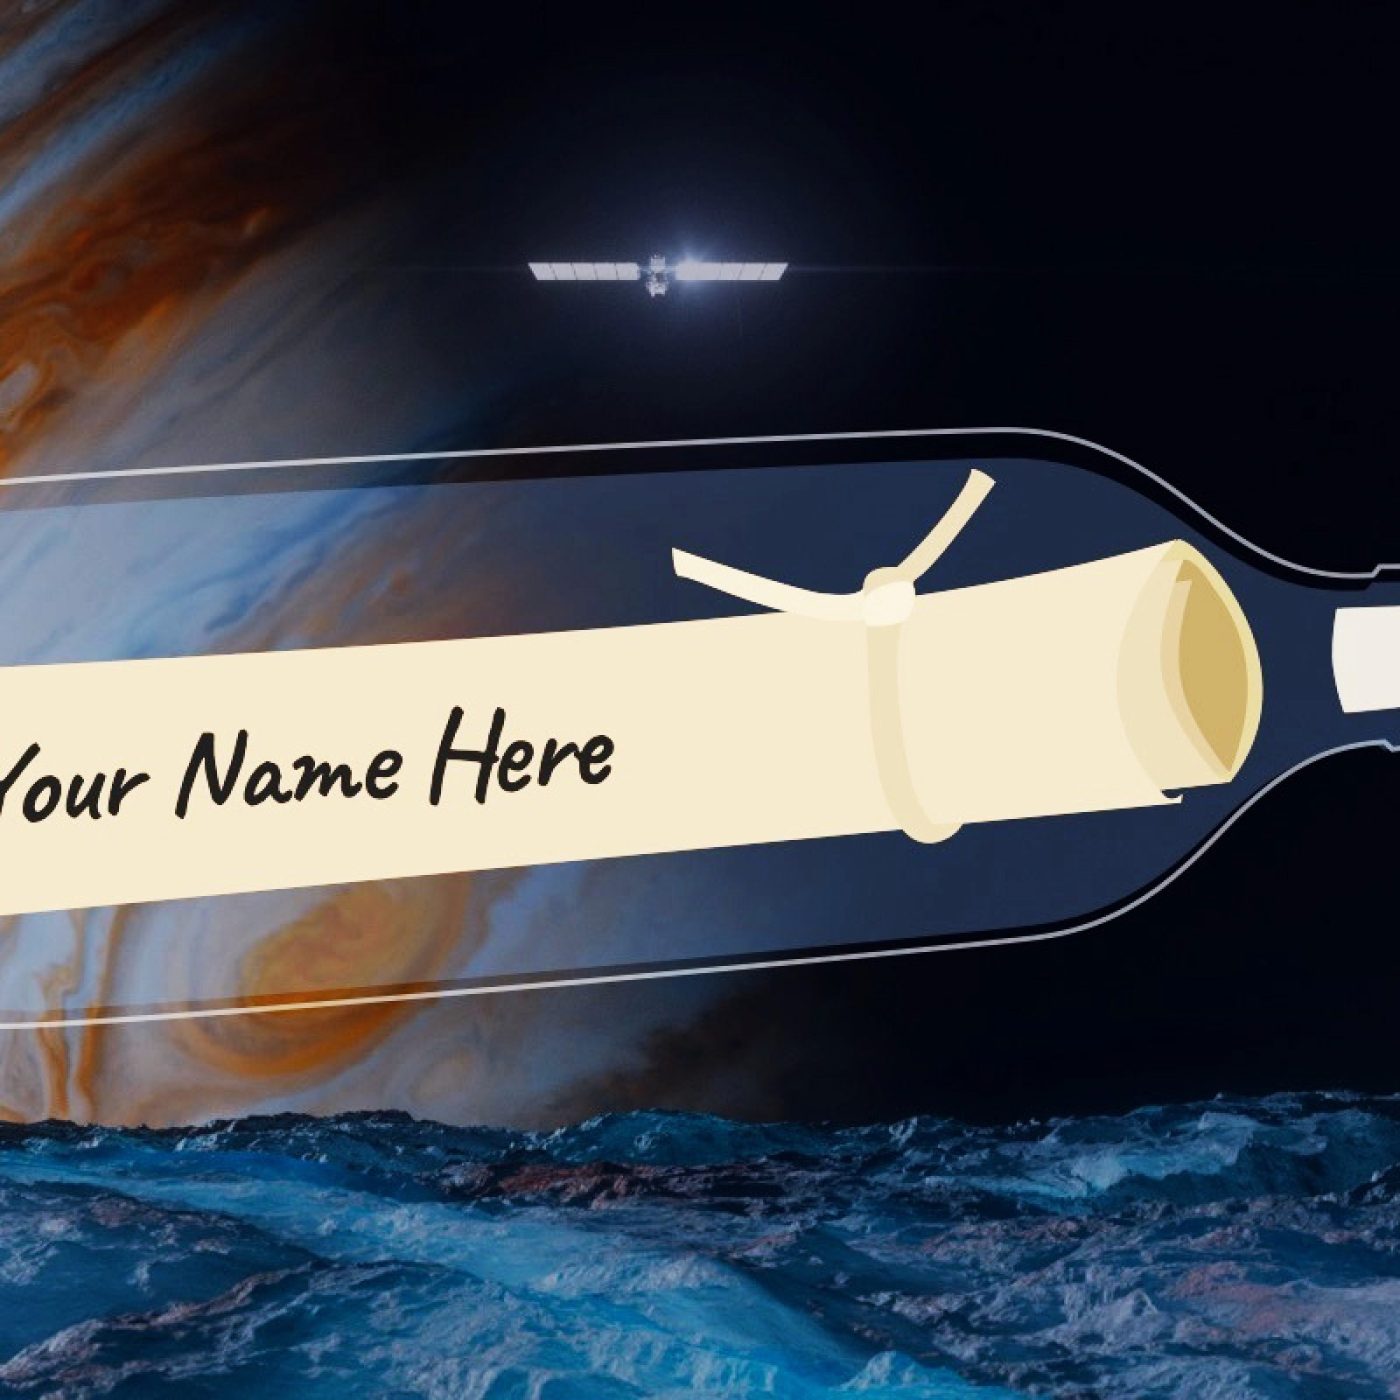 Join Us  Message in a Bottle – NASA's Europa Clipper